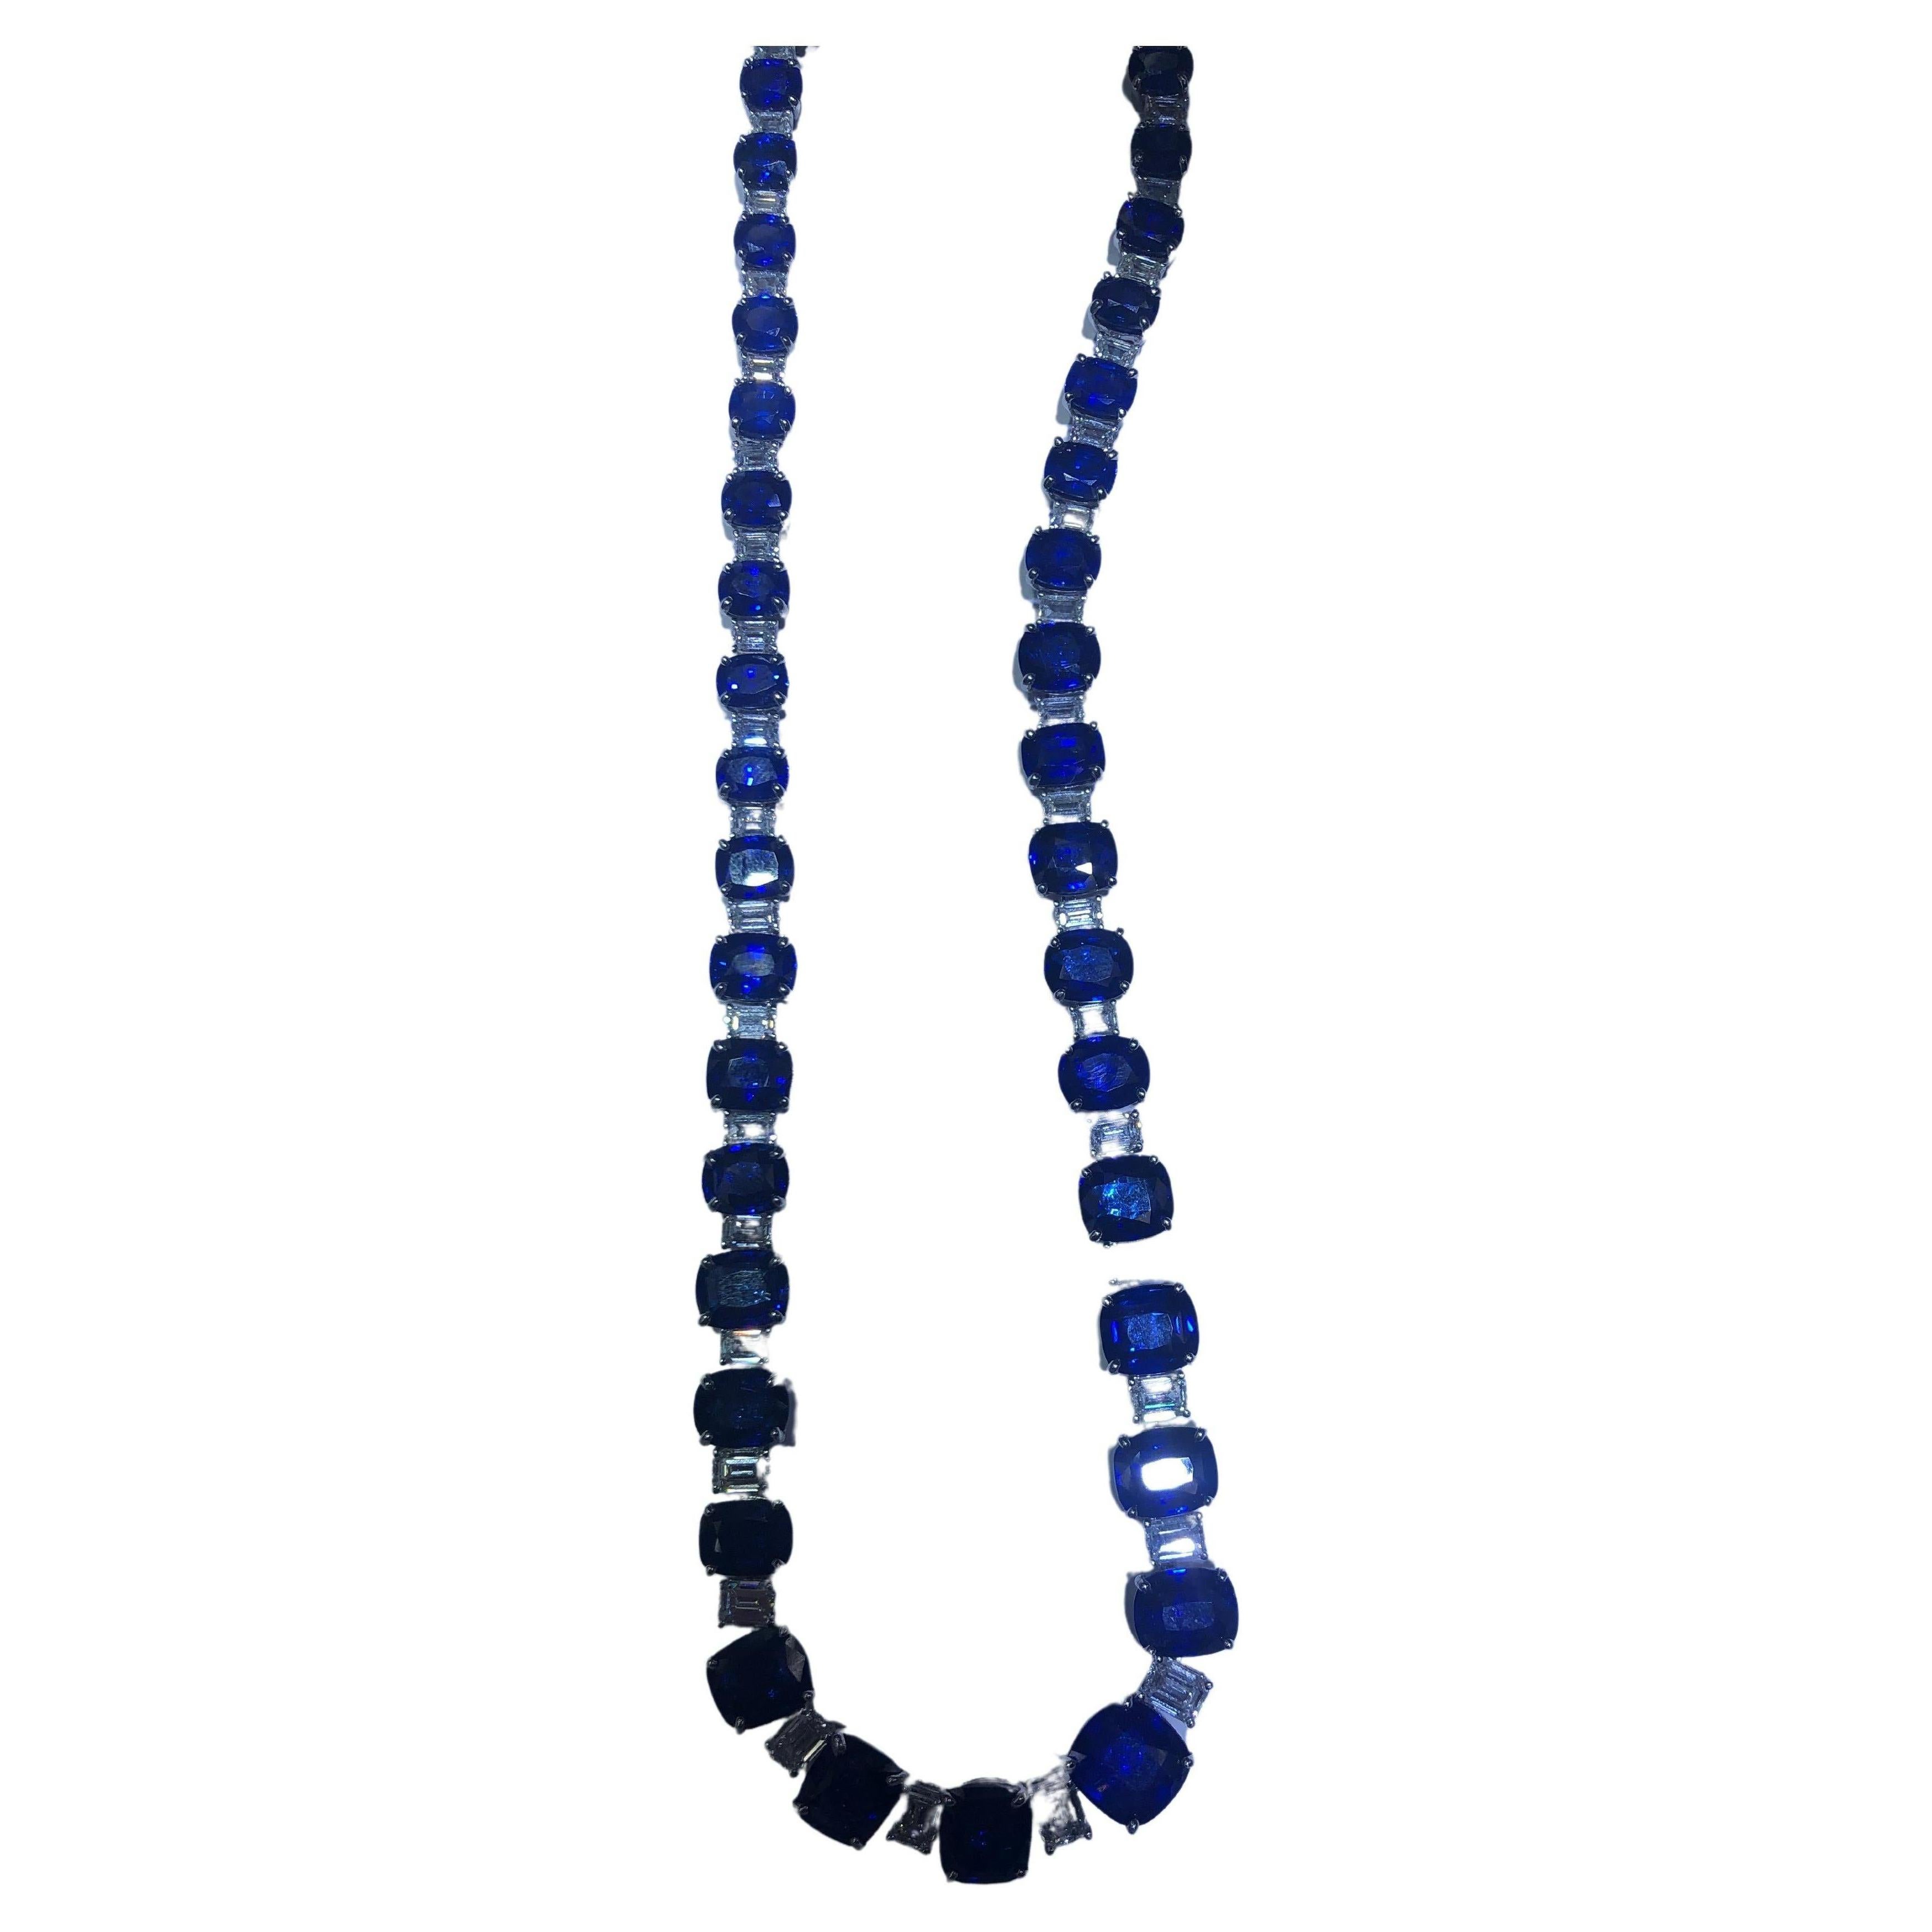 18kt White Gold Diamond and Sapphire Necklace - Color Stone Necklaces -  Necklaces - Fashion Jewelry